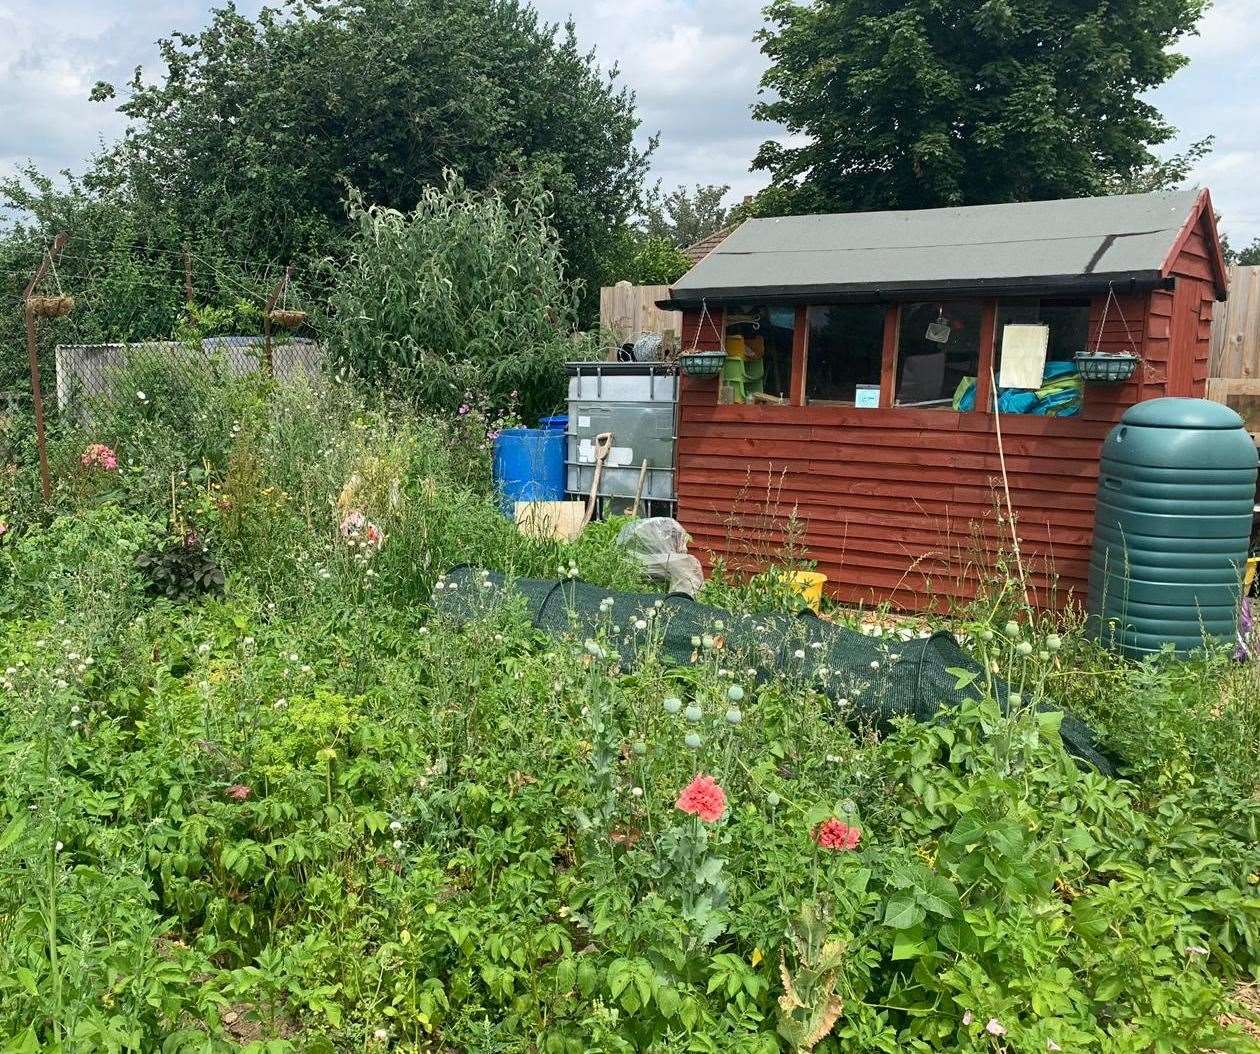 The Shepway Chariot garden is for the community to use and learn about growing vegetables